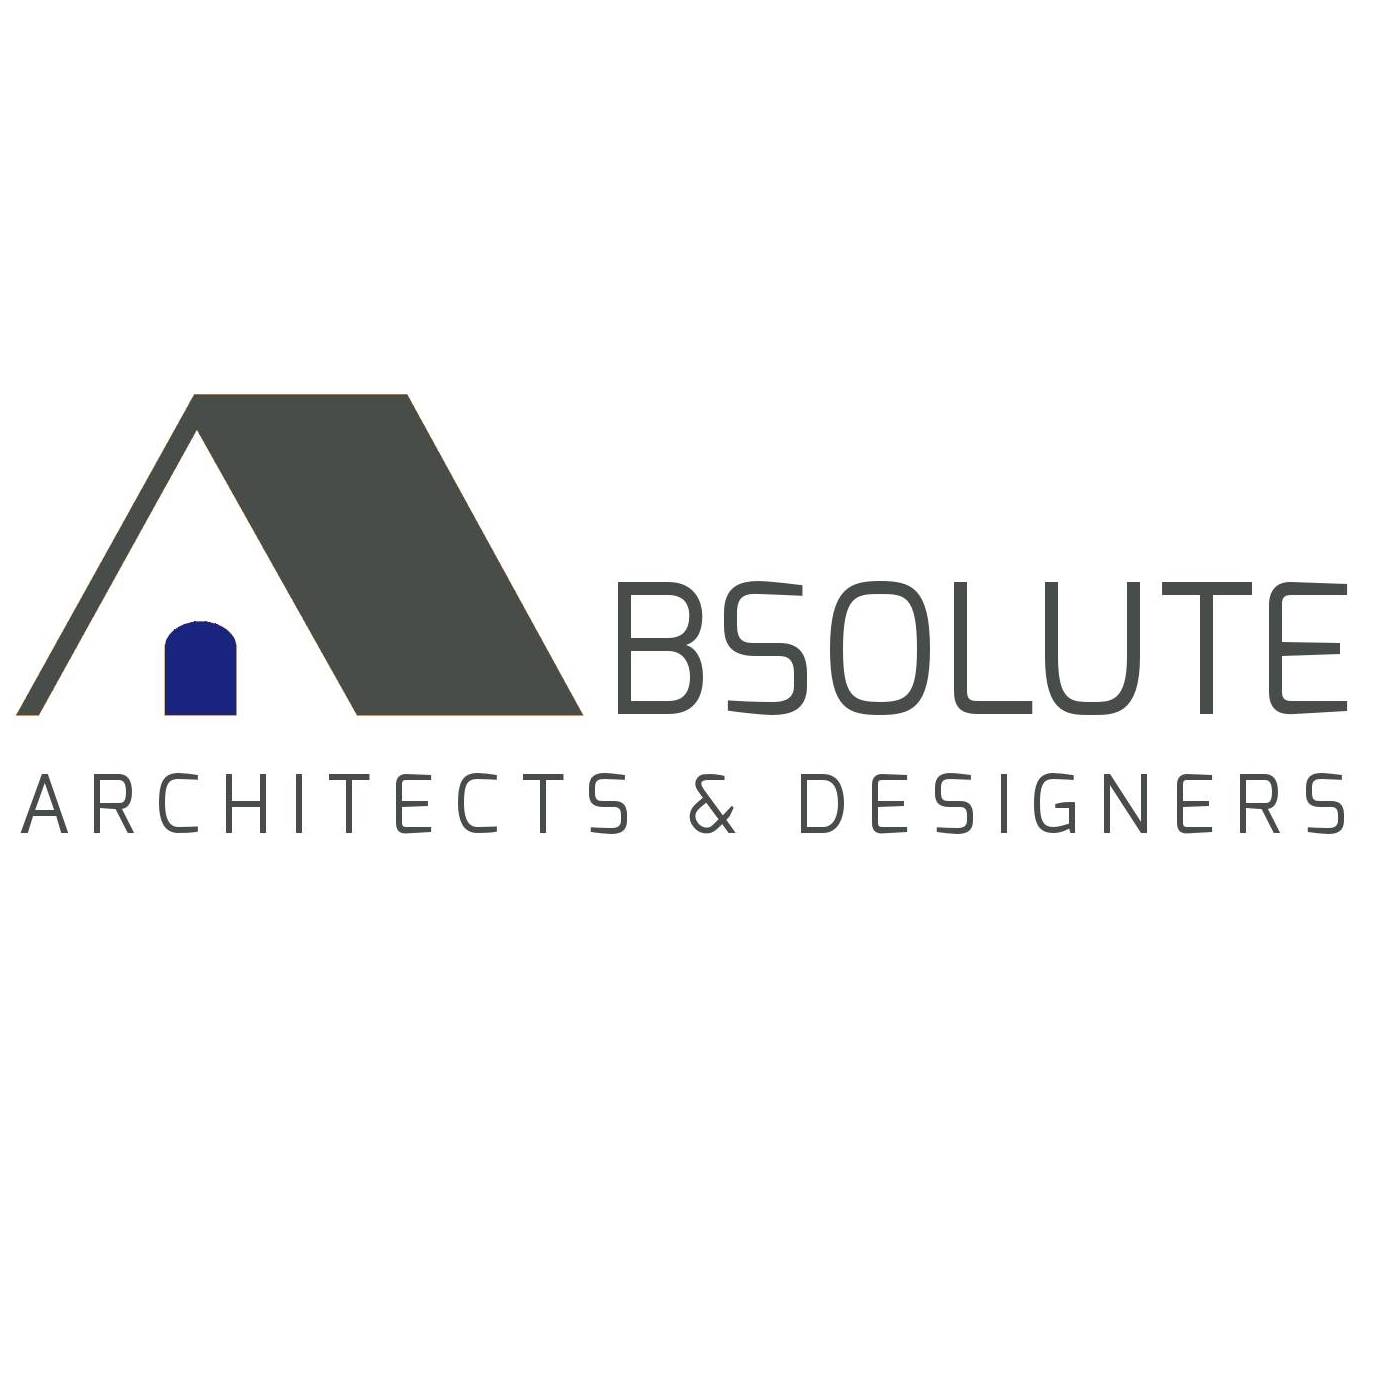 ABSOLUTE Architects and Designers|IT Services|Professional Services